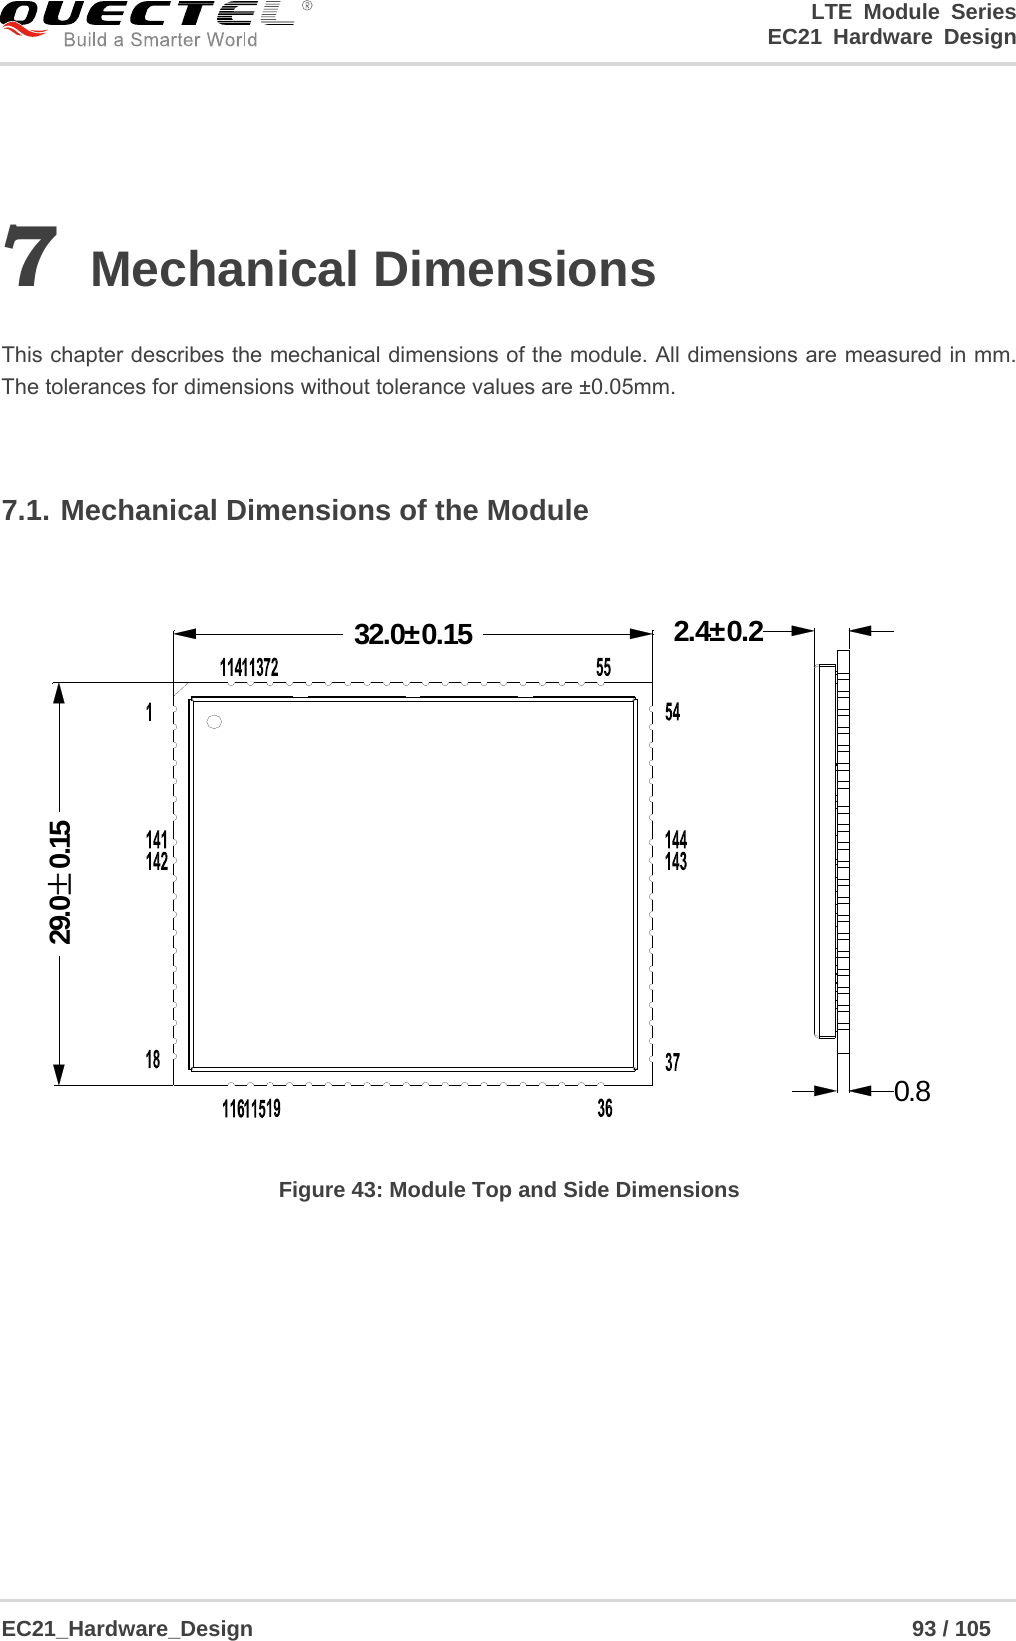                                                                        LTE Module Series                                                                 EC21 Hardware Design  EC21_Hardware_Design                                                            93 / 105    7 Mechanical Dimensions  This chapter describes the mechanical dimensions of the module. All dimensions are measured in mm. The tolerances for dimensions without tolerance values are ±0.05mm.  7.1. Mechanical Dimensions of the Module 32.0±0.1529.0±0.150.82.4±0.2 Figure 43: Module Top and Side Dimensions  